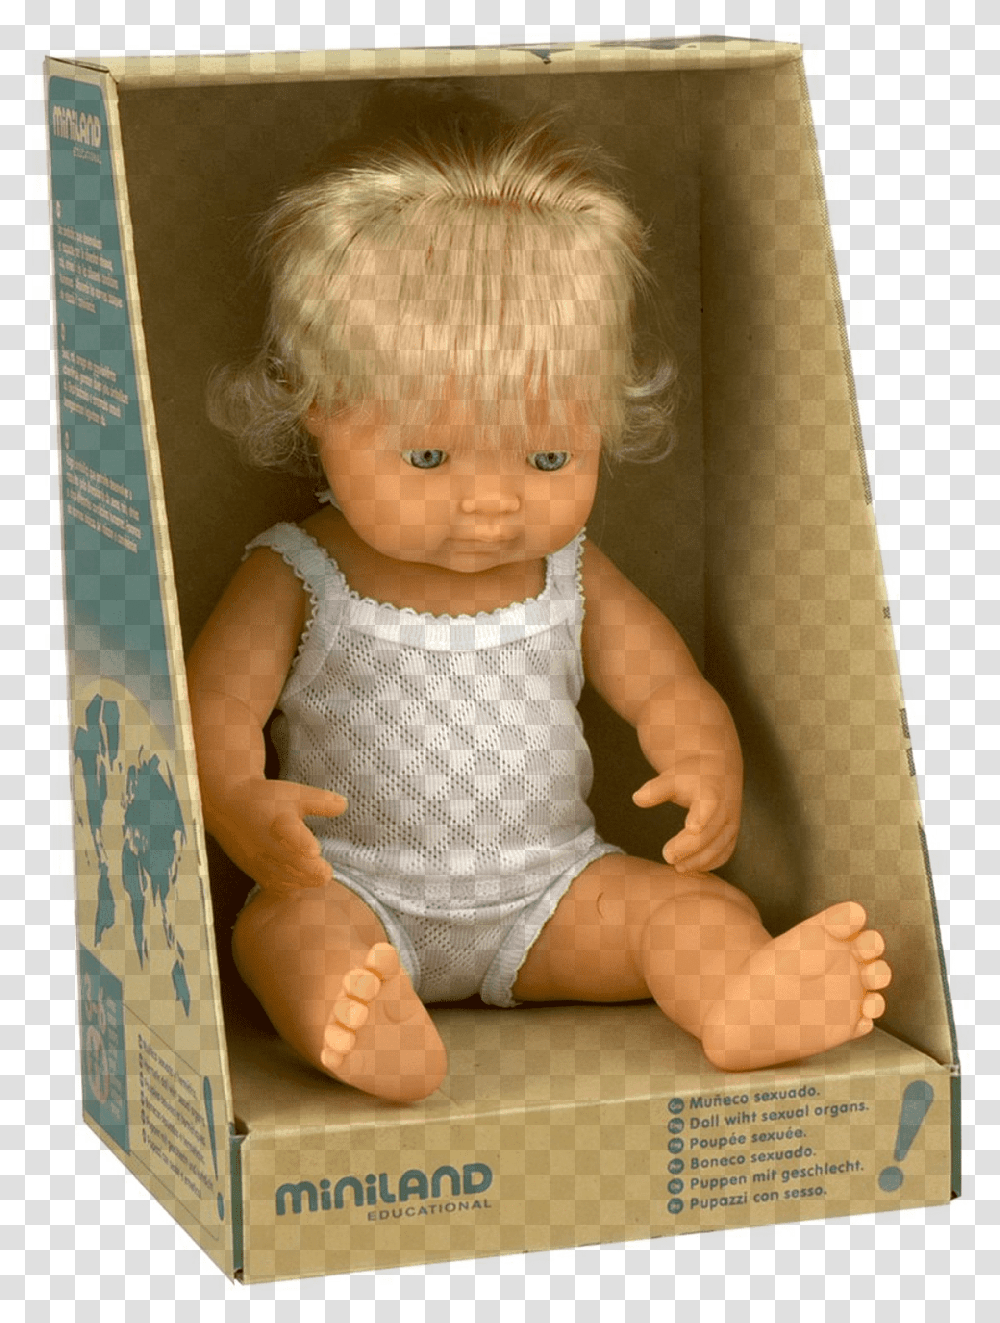 Diversity Toys Miniland Anatomically Correct Baby Doll Caucasian Girl, Furniture, Person, Human, Figurine Transparent Png